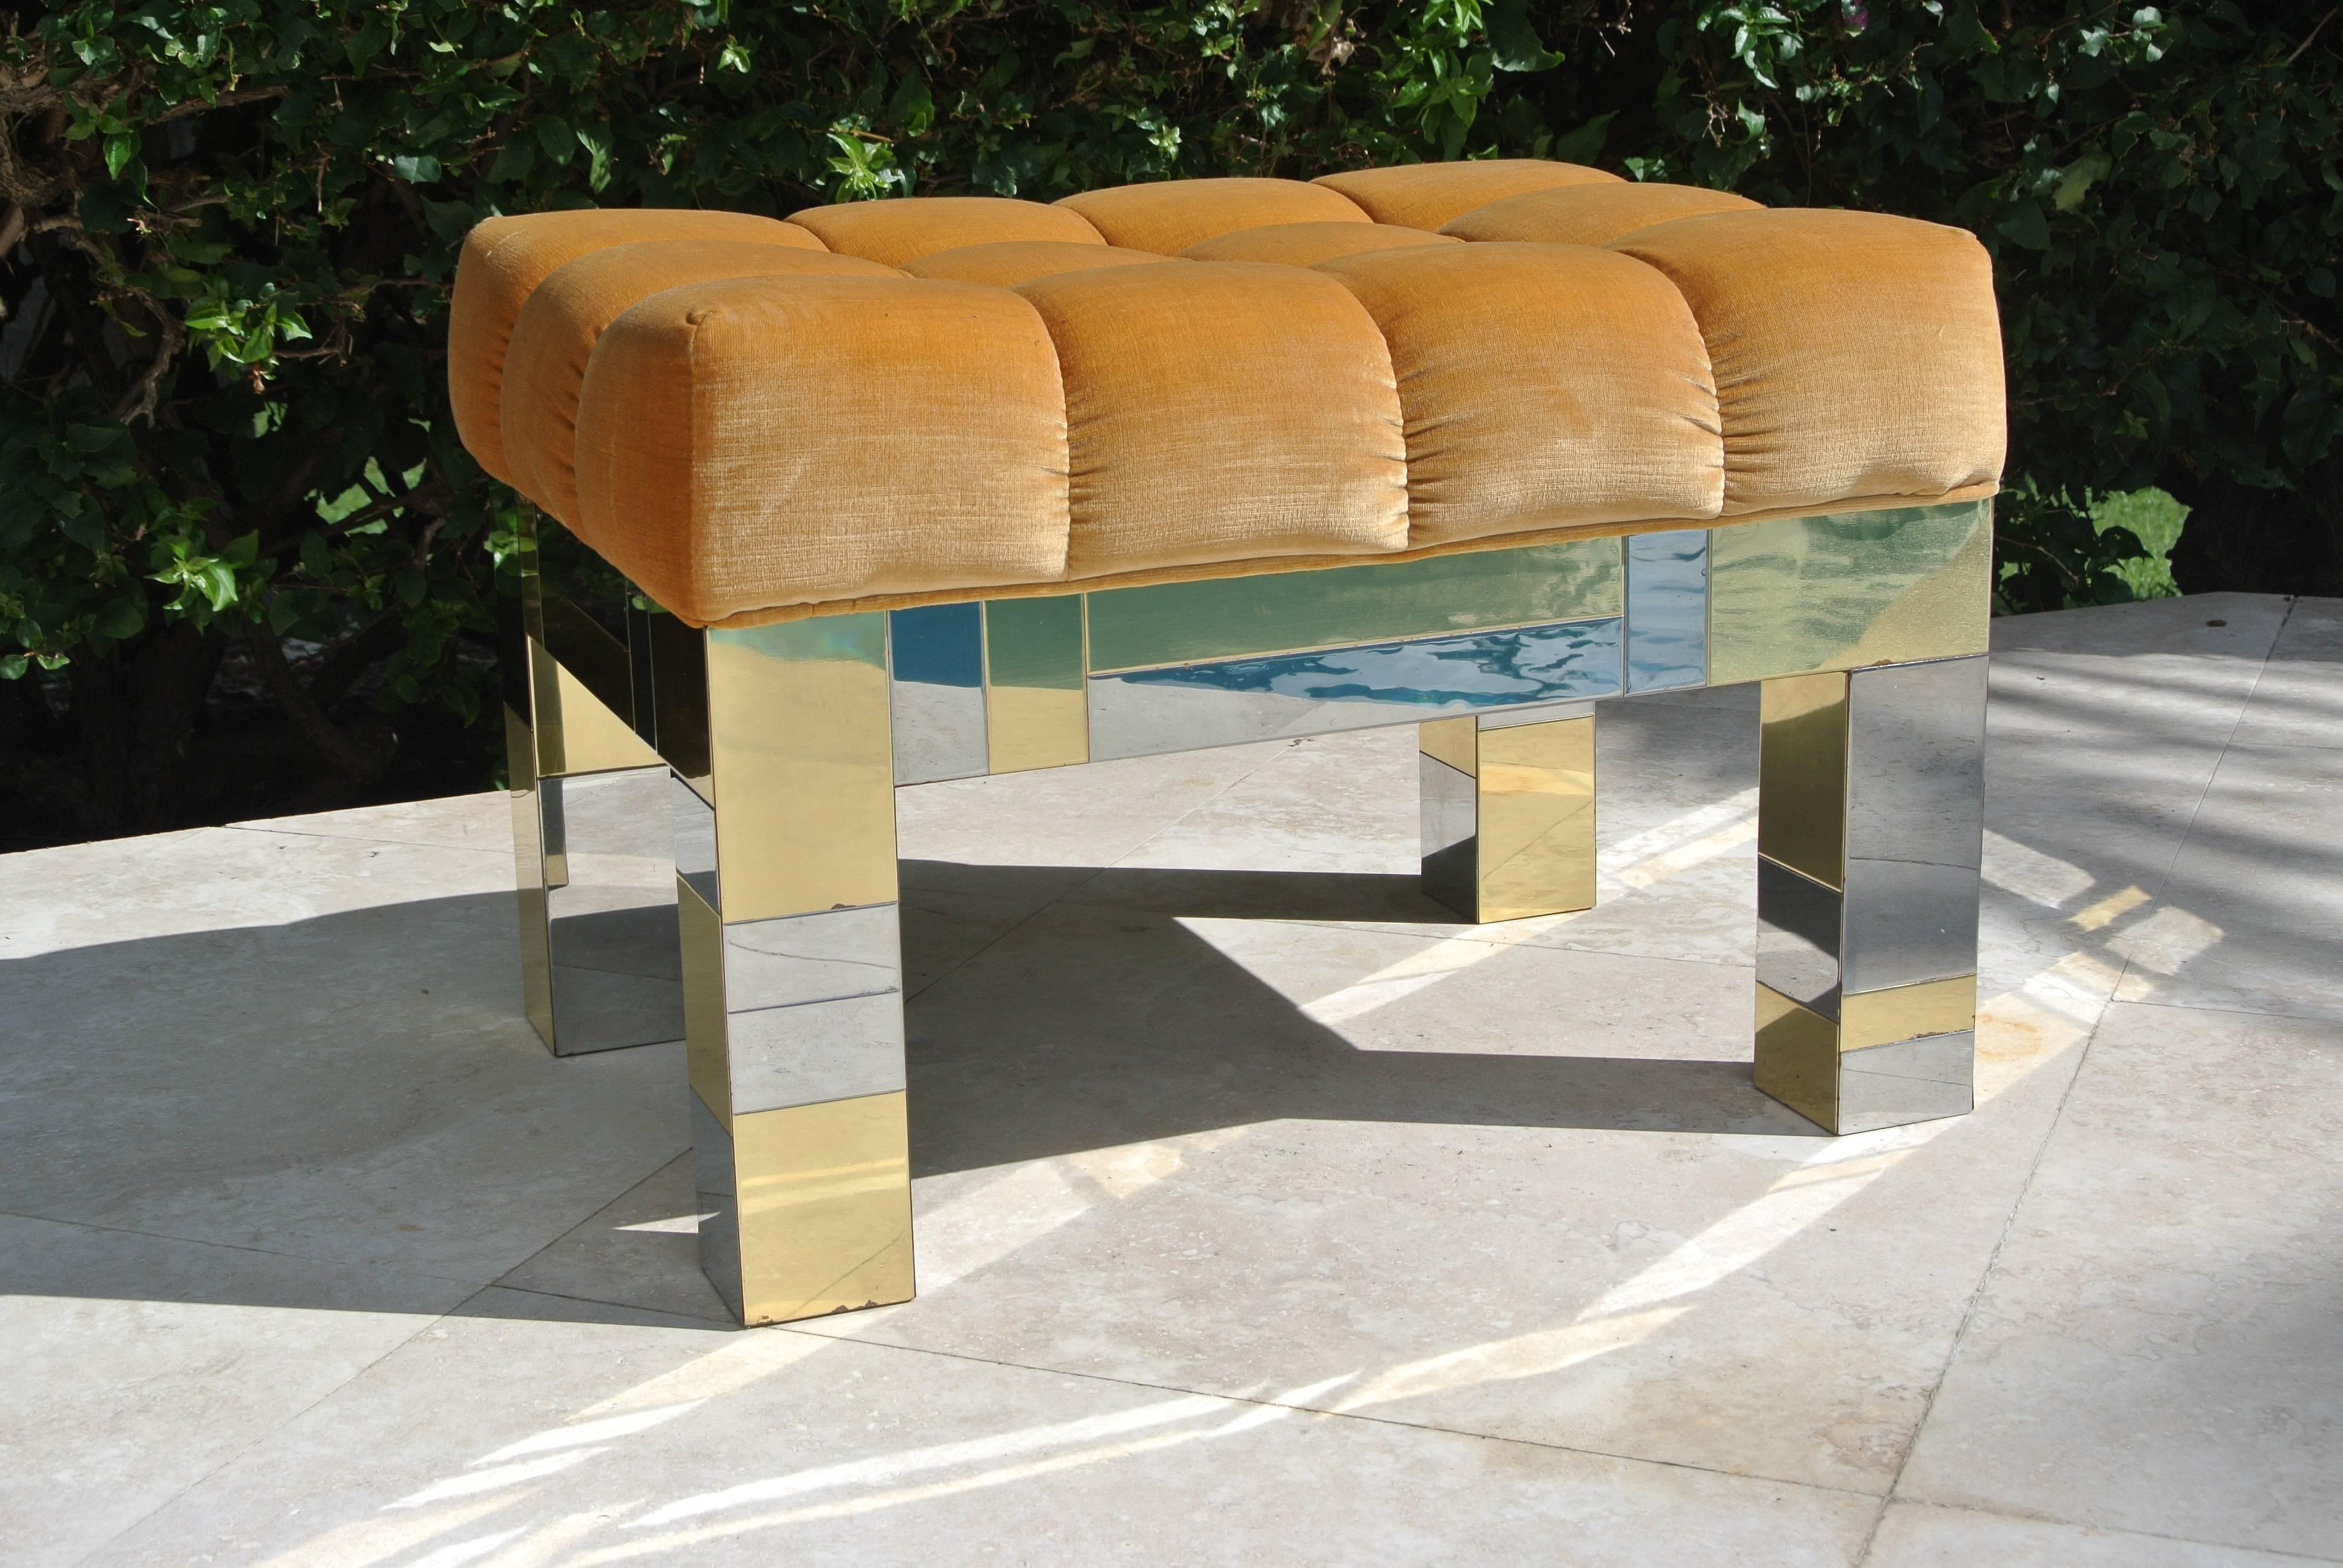 Beautiful Brass & Chrome Cityscape Stool by American Designer Paul Evans. The upholstery is a tufted velvet